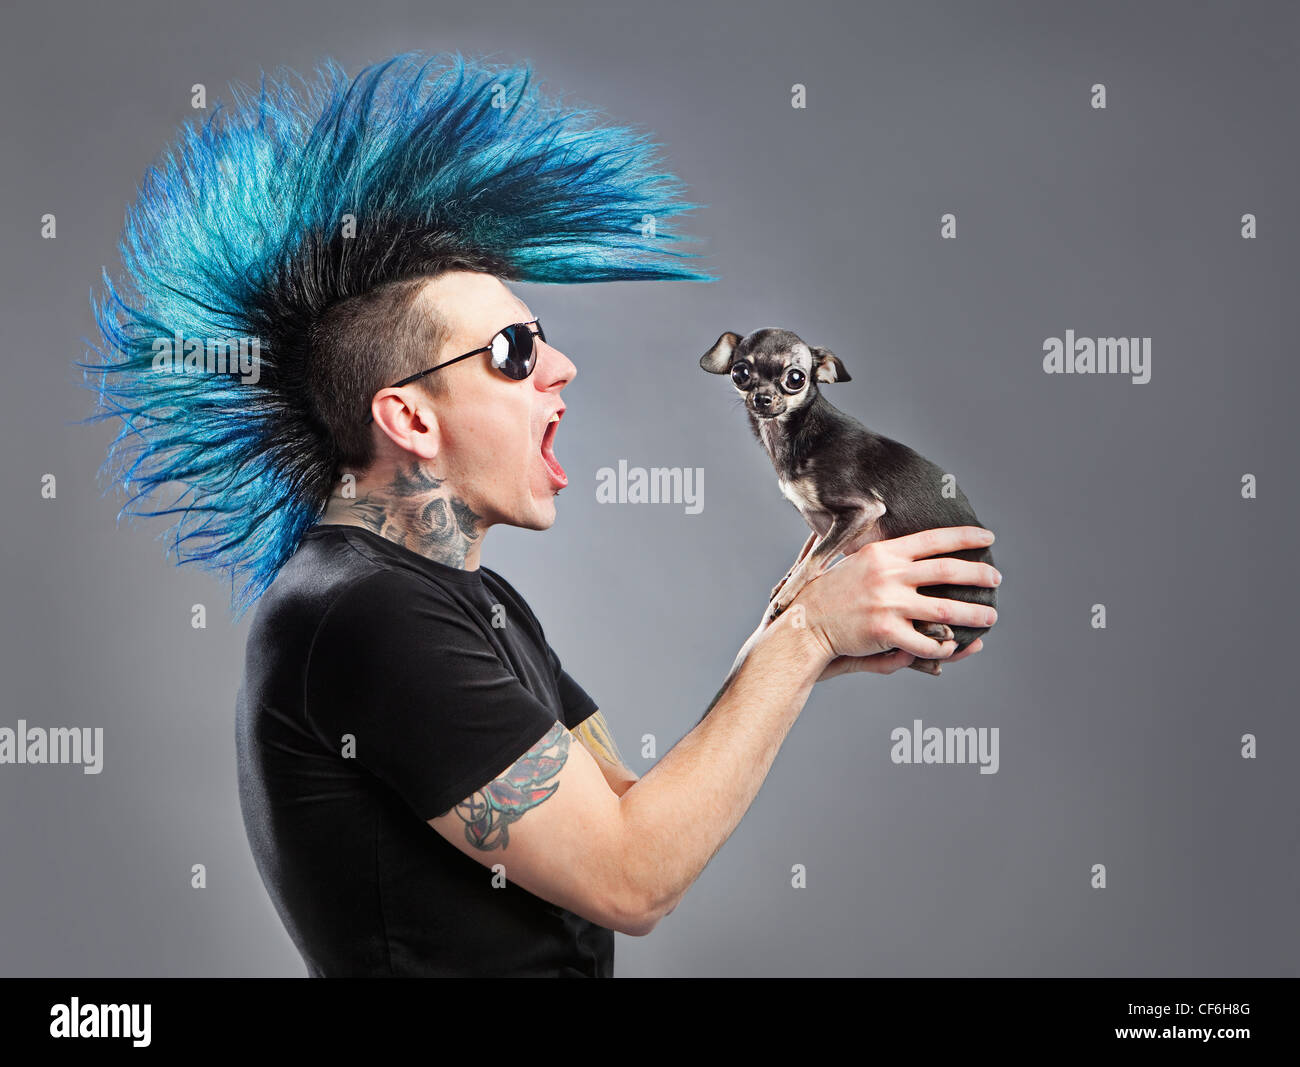 A Man With A Blue Mohawk Yells At His Dog Stock Photo